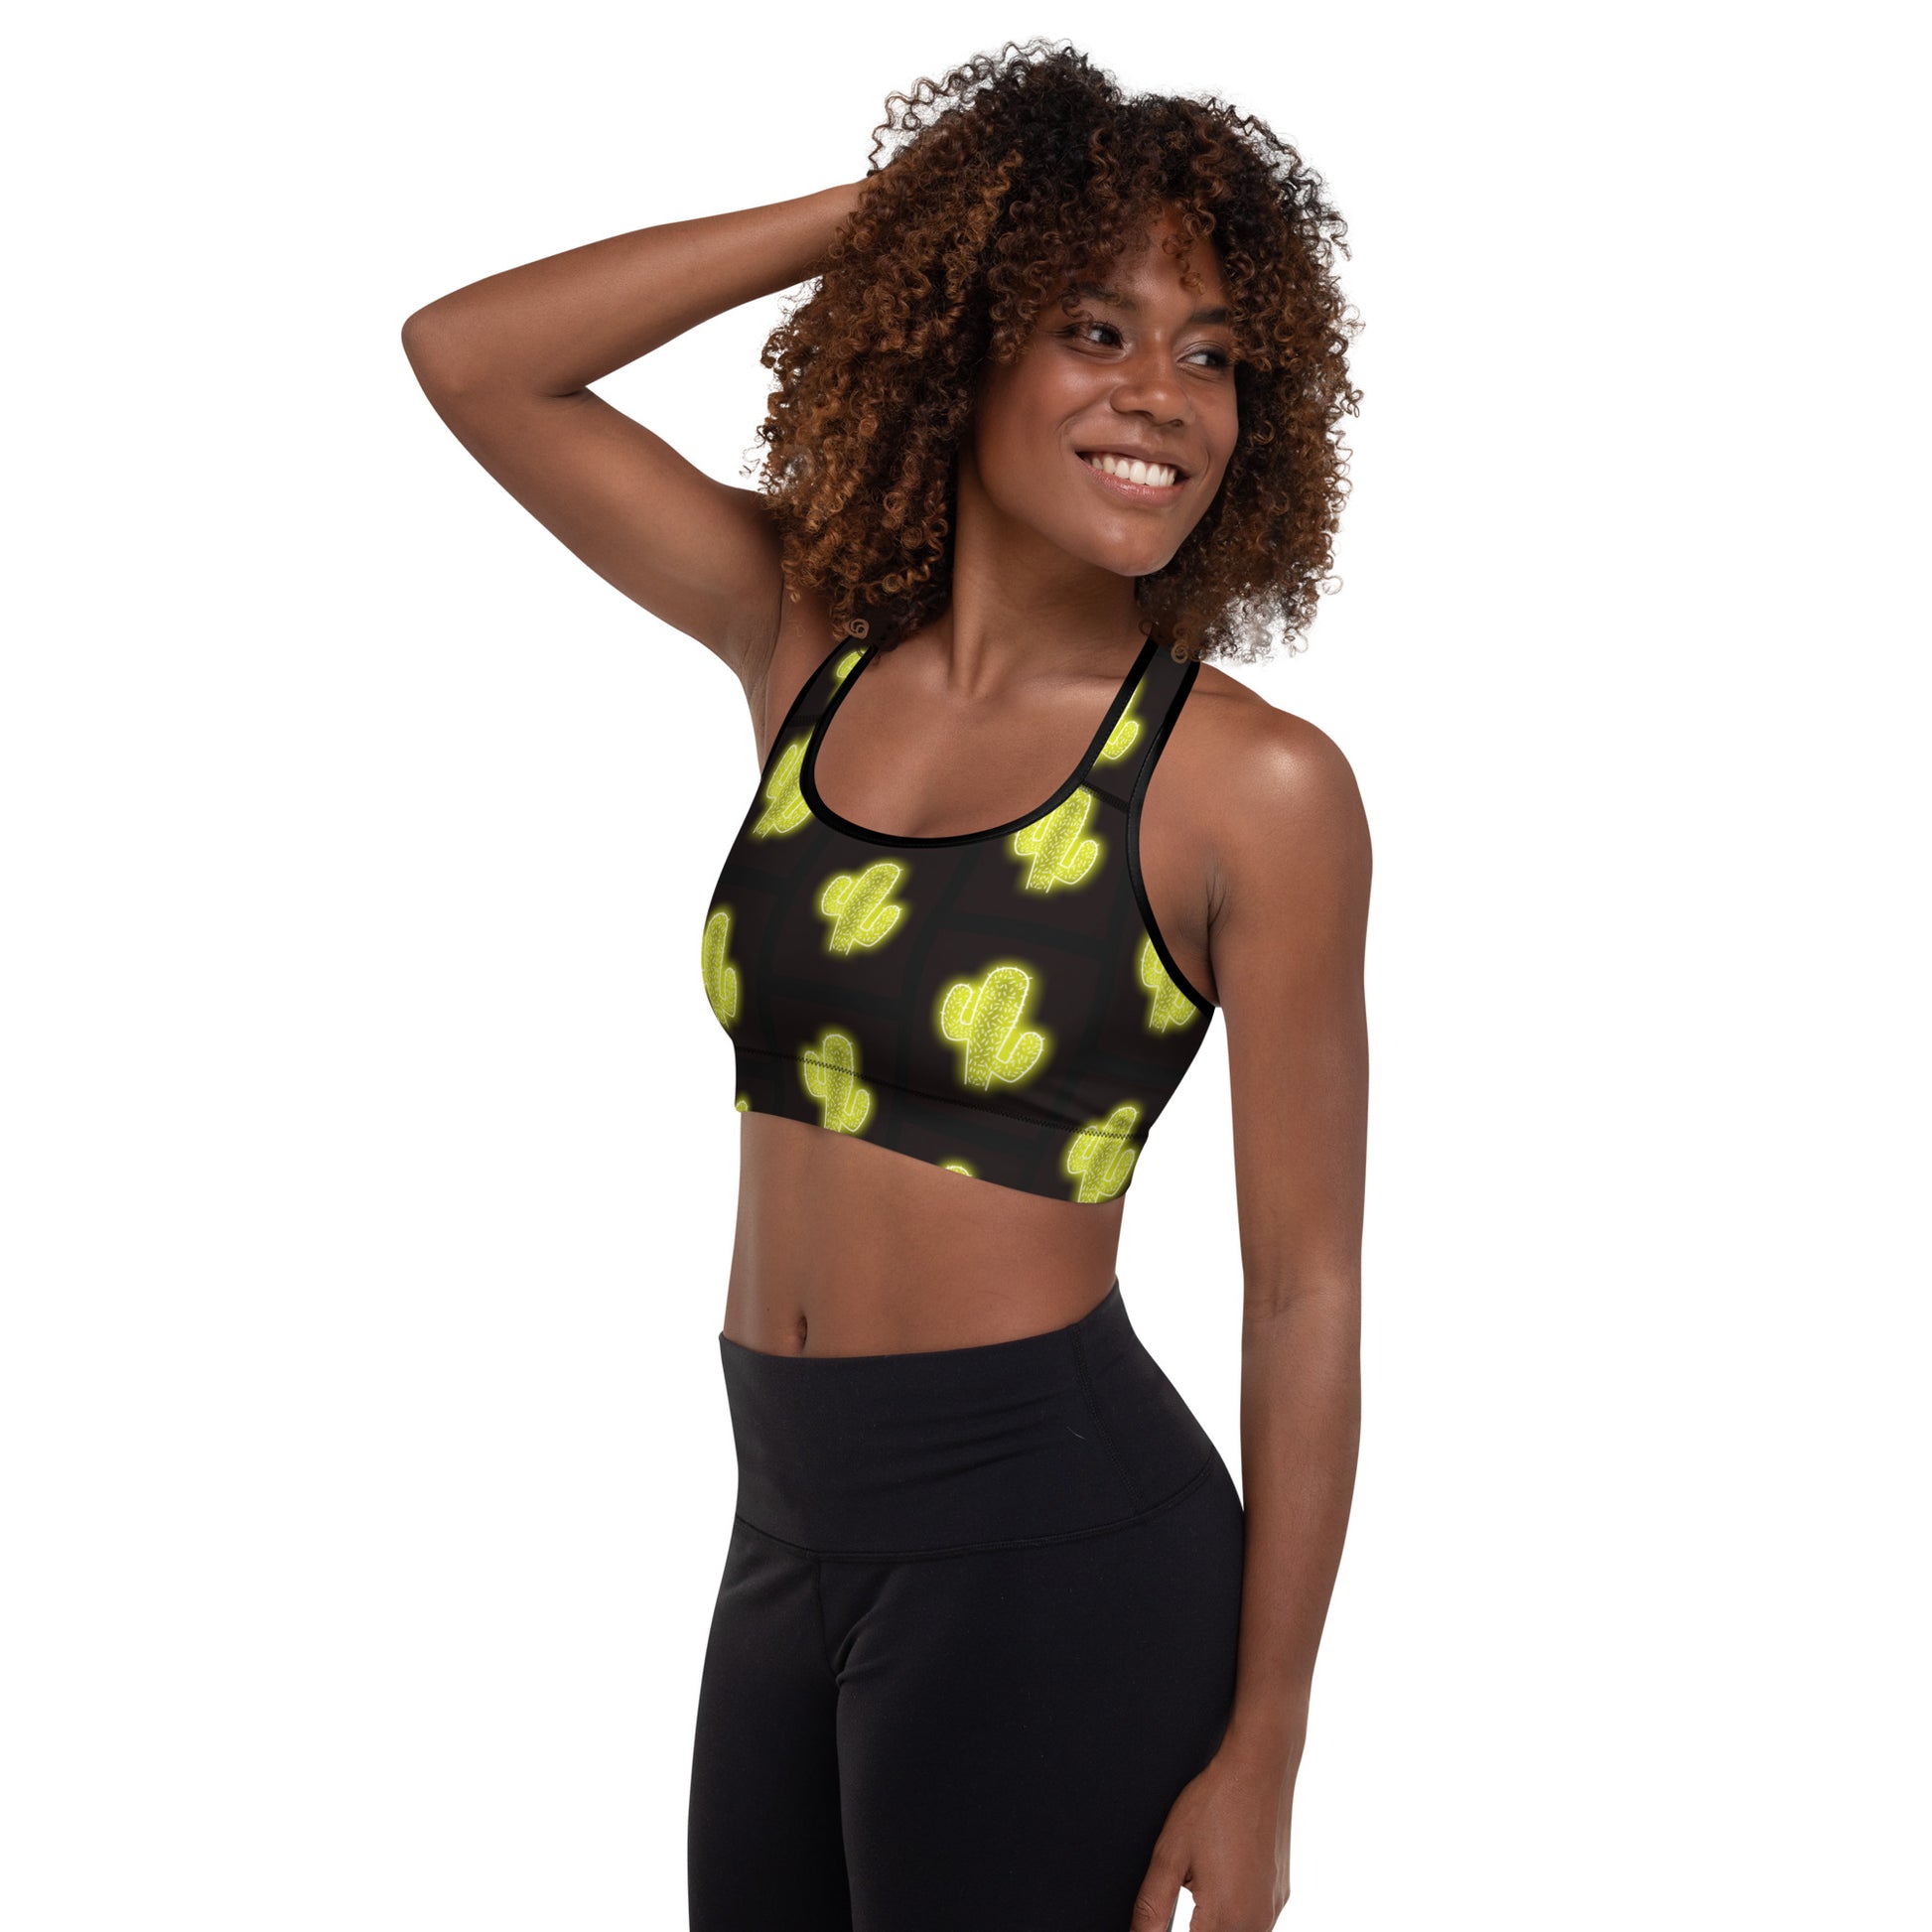 Green Neon Cactus Padded Sports Bra - bra, cactus print, green, neon, padded, padded bra, sports bra, work out, workout, yellow, yellow neon -  - Baha Ranch Western Wear